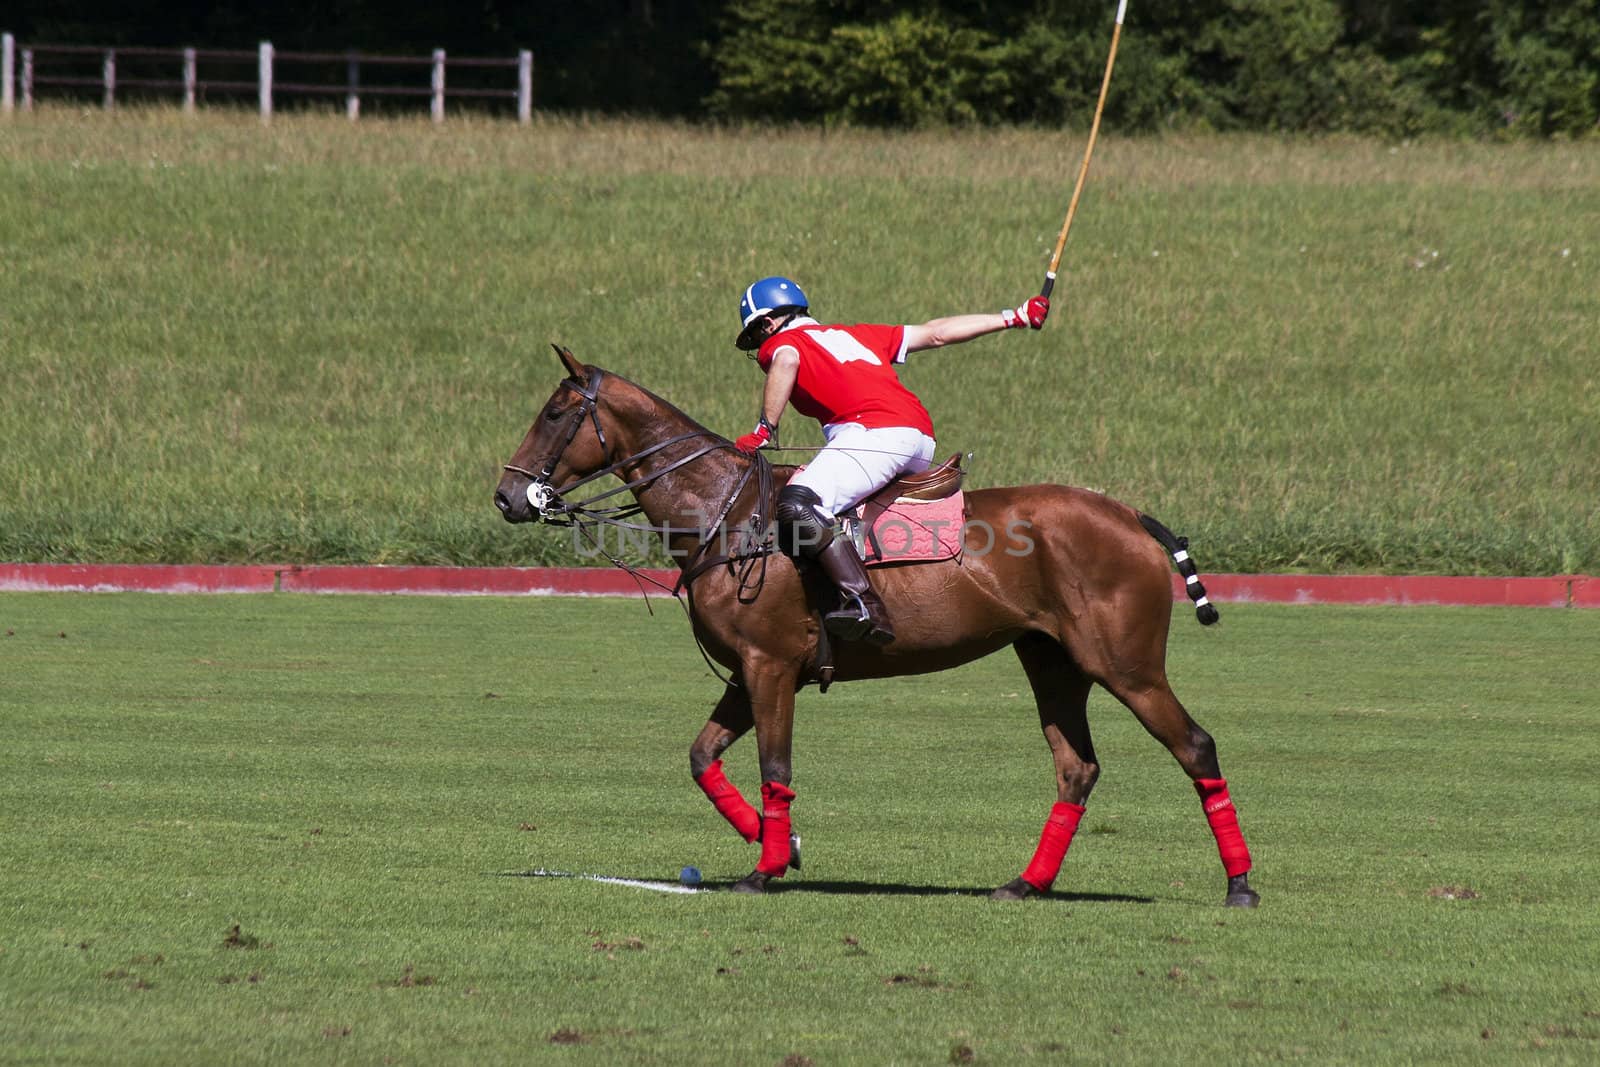 Polo player taking a penalty shot.